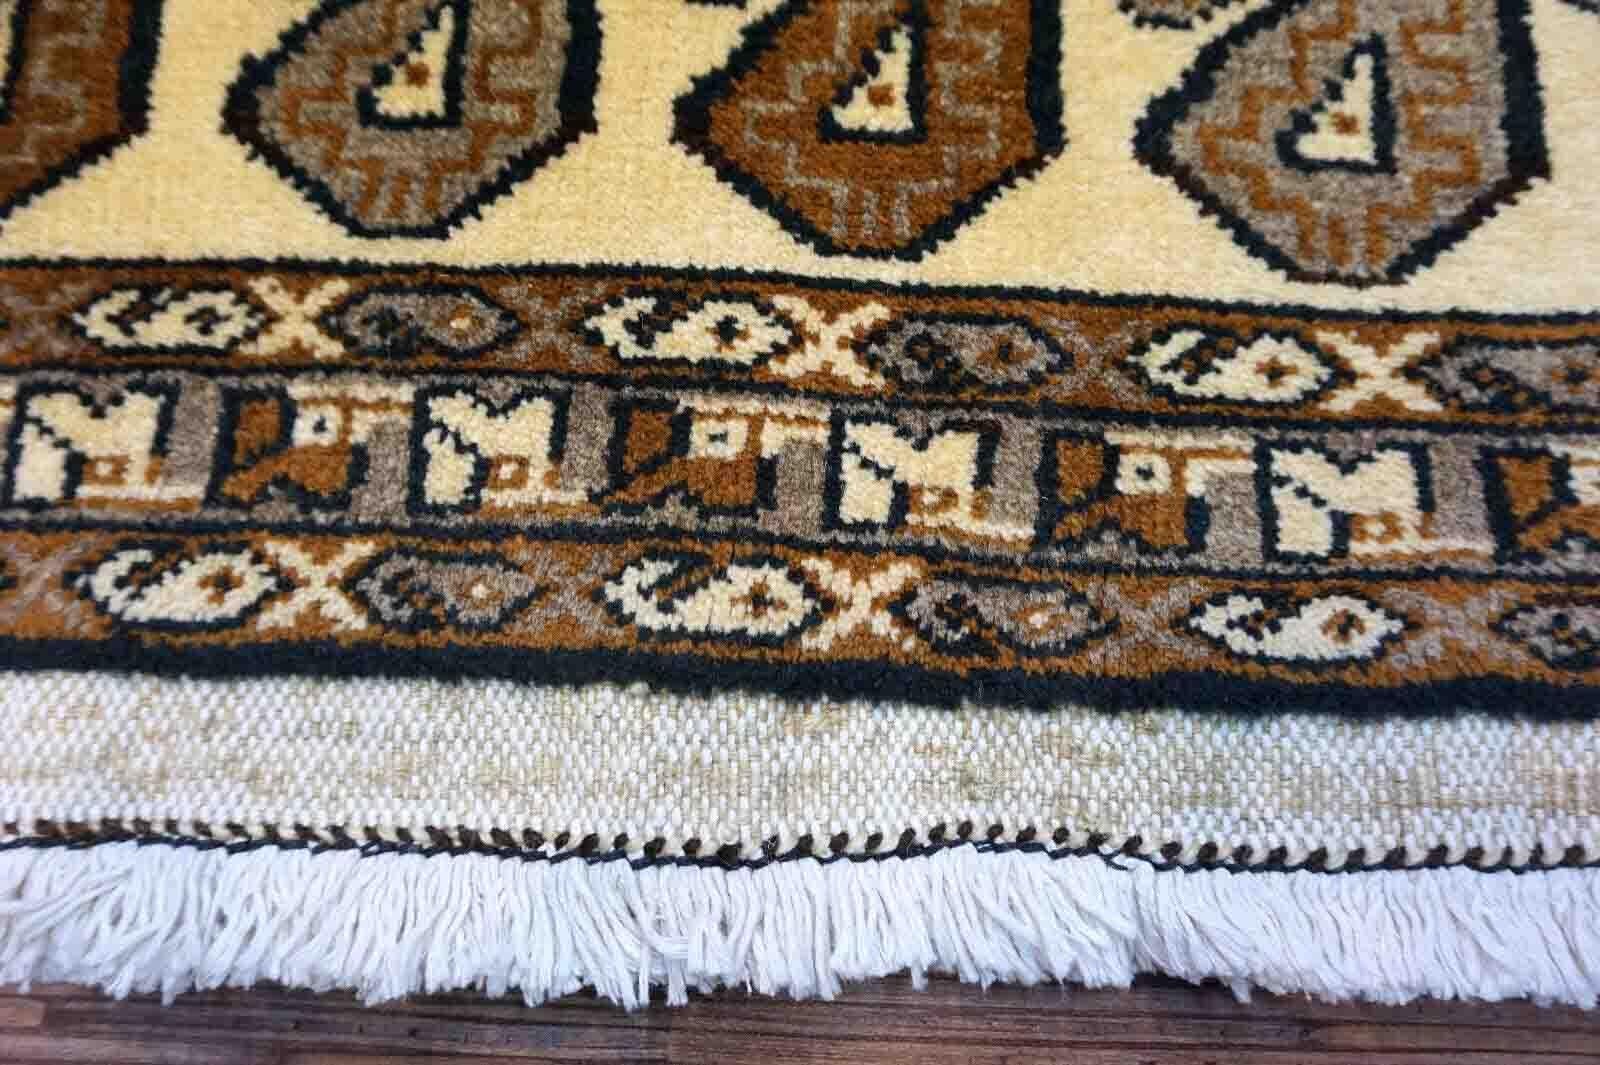 Handmade vintage Gabbeh rug in beige color with repeating paisley design. The rug is from the end of 20th century in original good condition.

-condition: original good,

-circa: 1970s,

-size: 3.2' x 6.1' (99cm x 187cm),

-material: